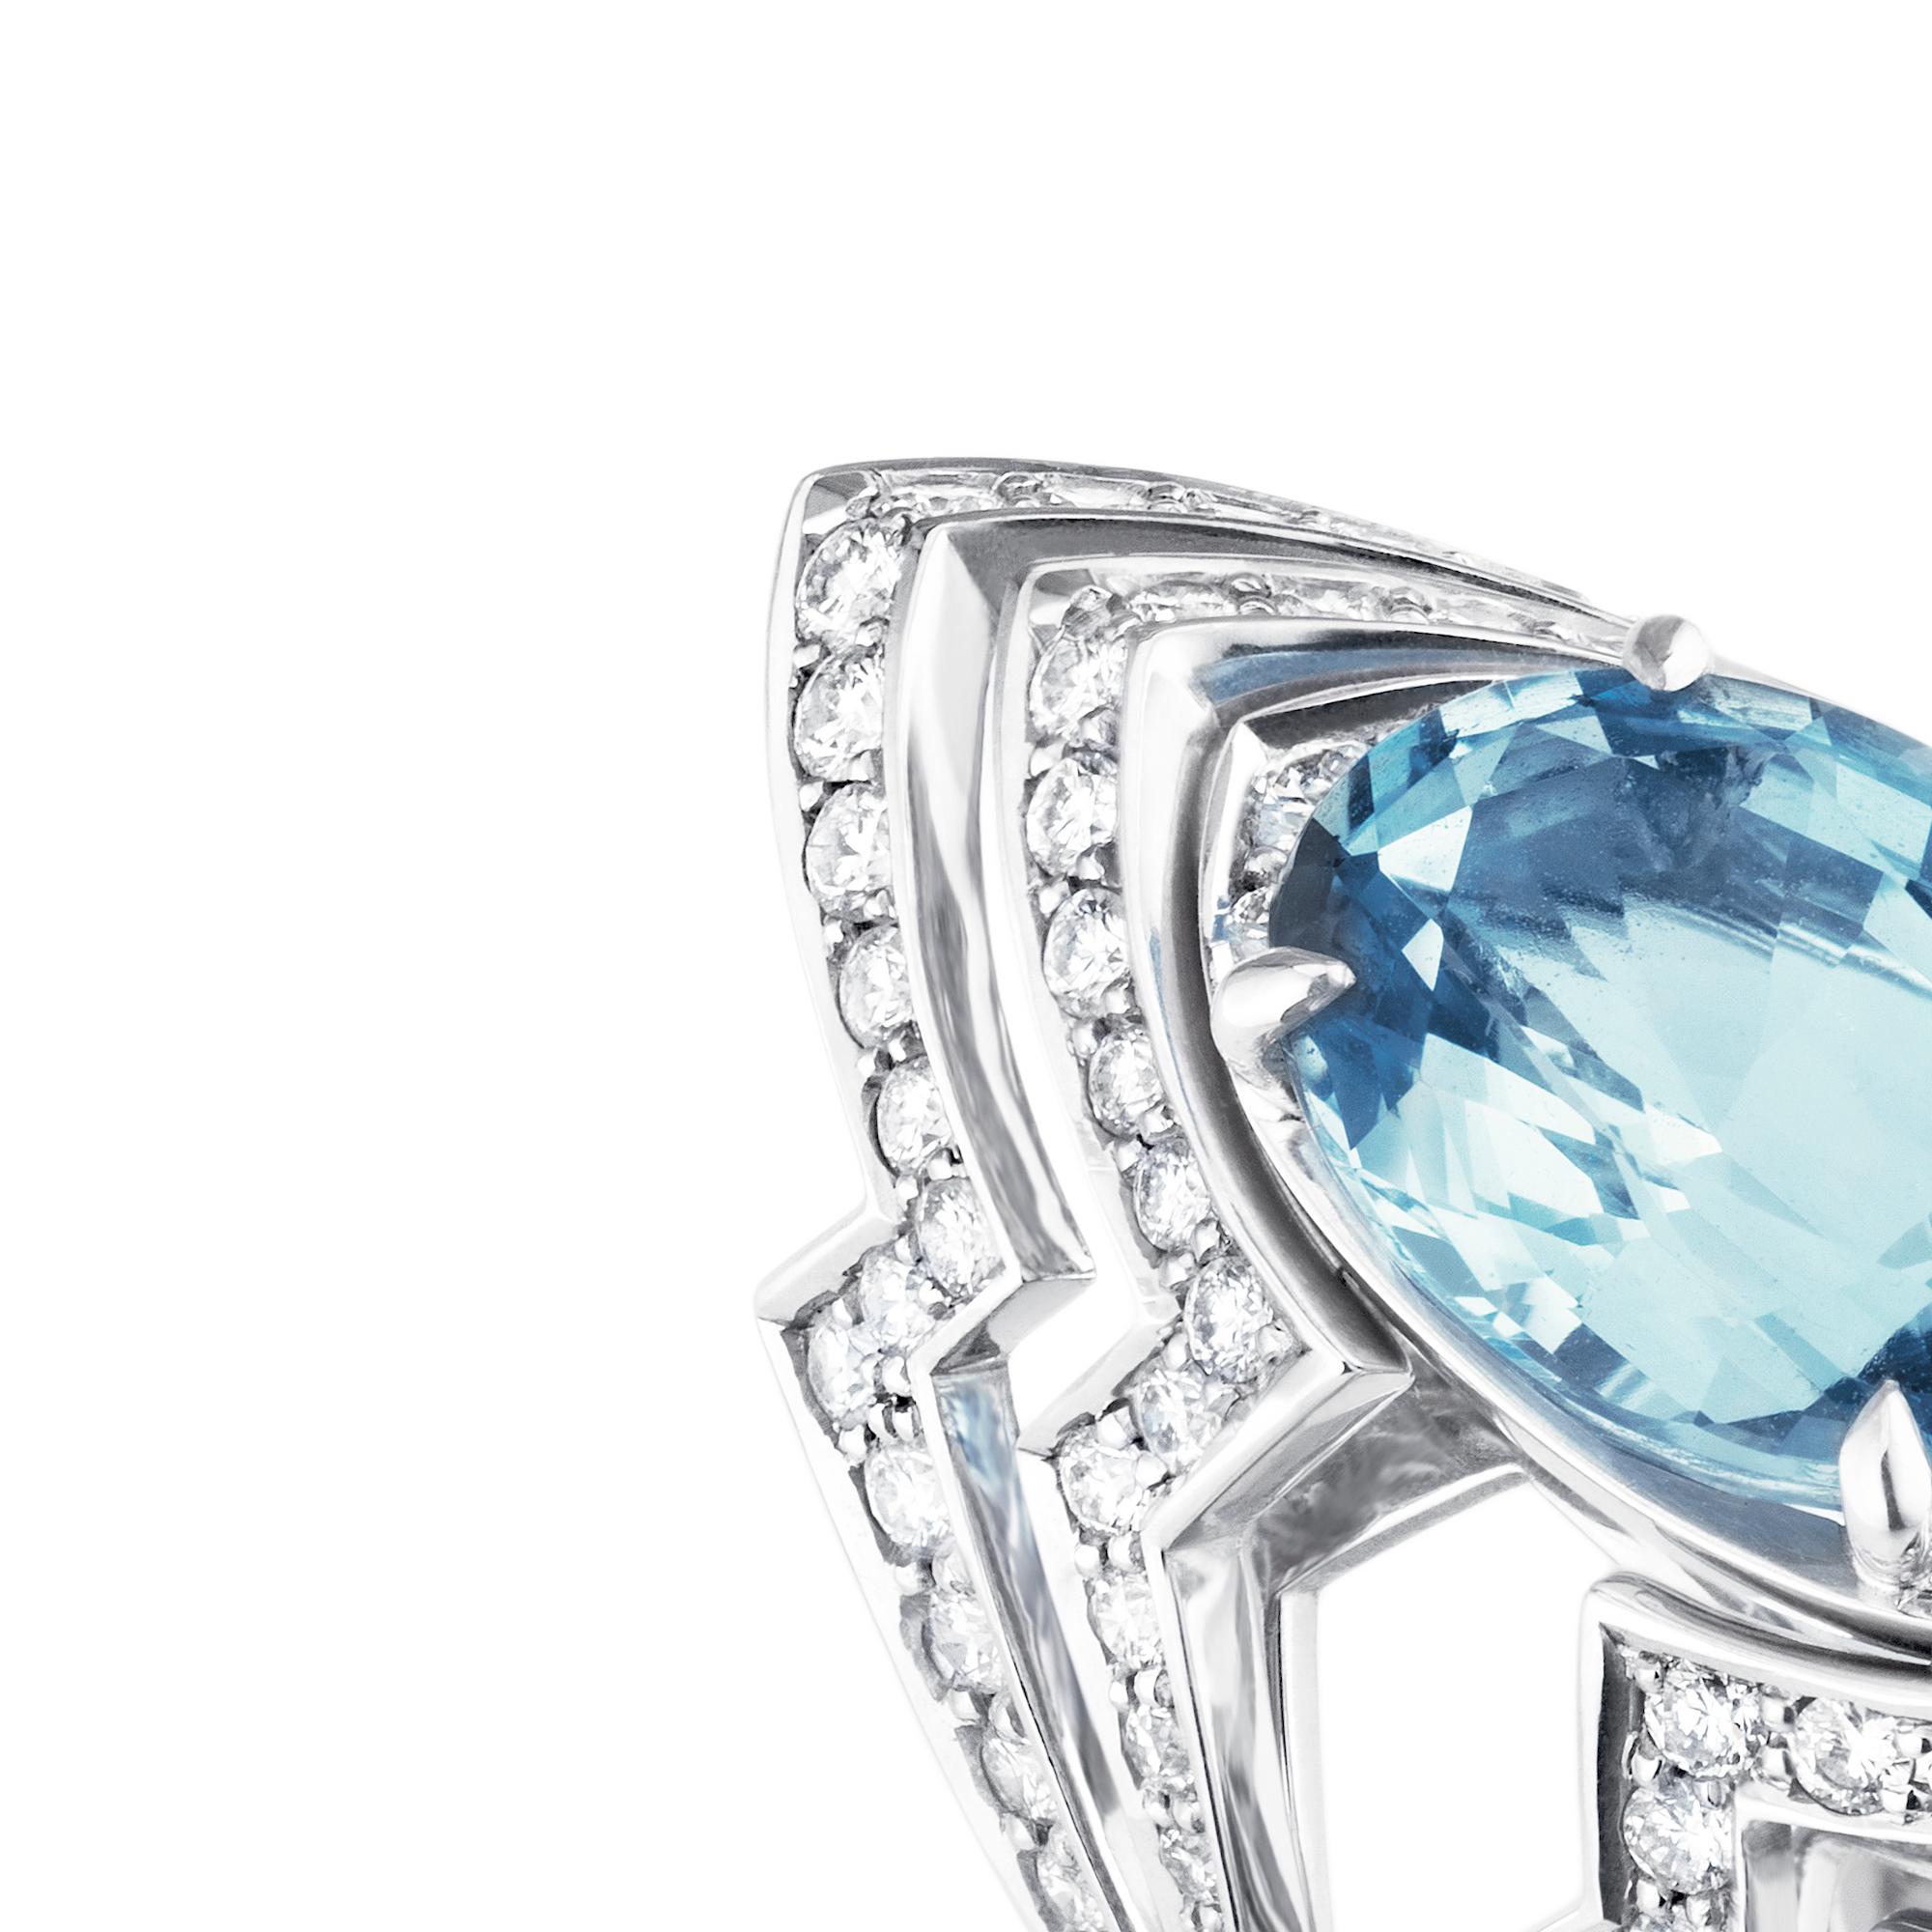 Contemporary Stephen Webster Lady Stardust 18 Karat White Gold and Aquamarine Couture Ring